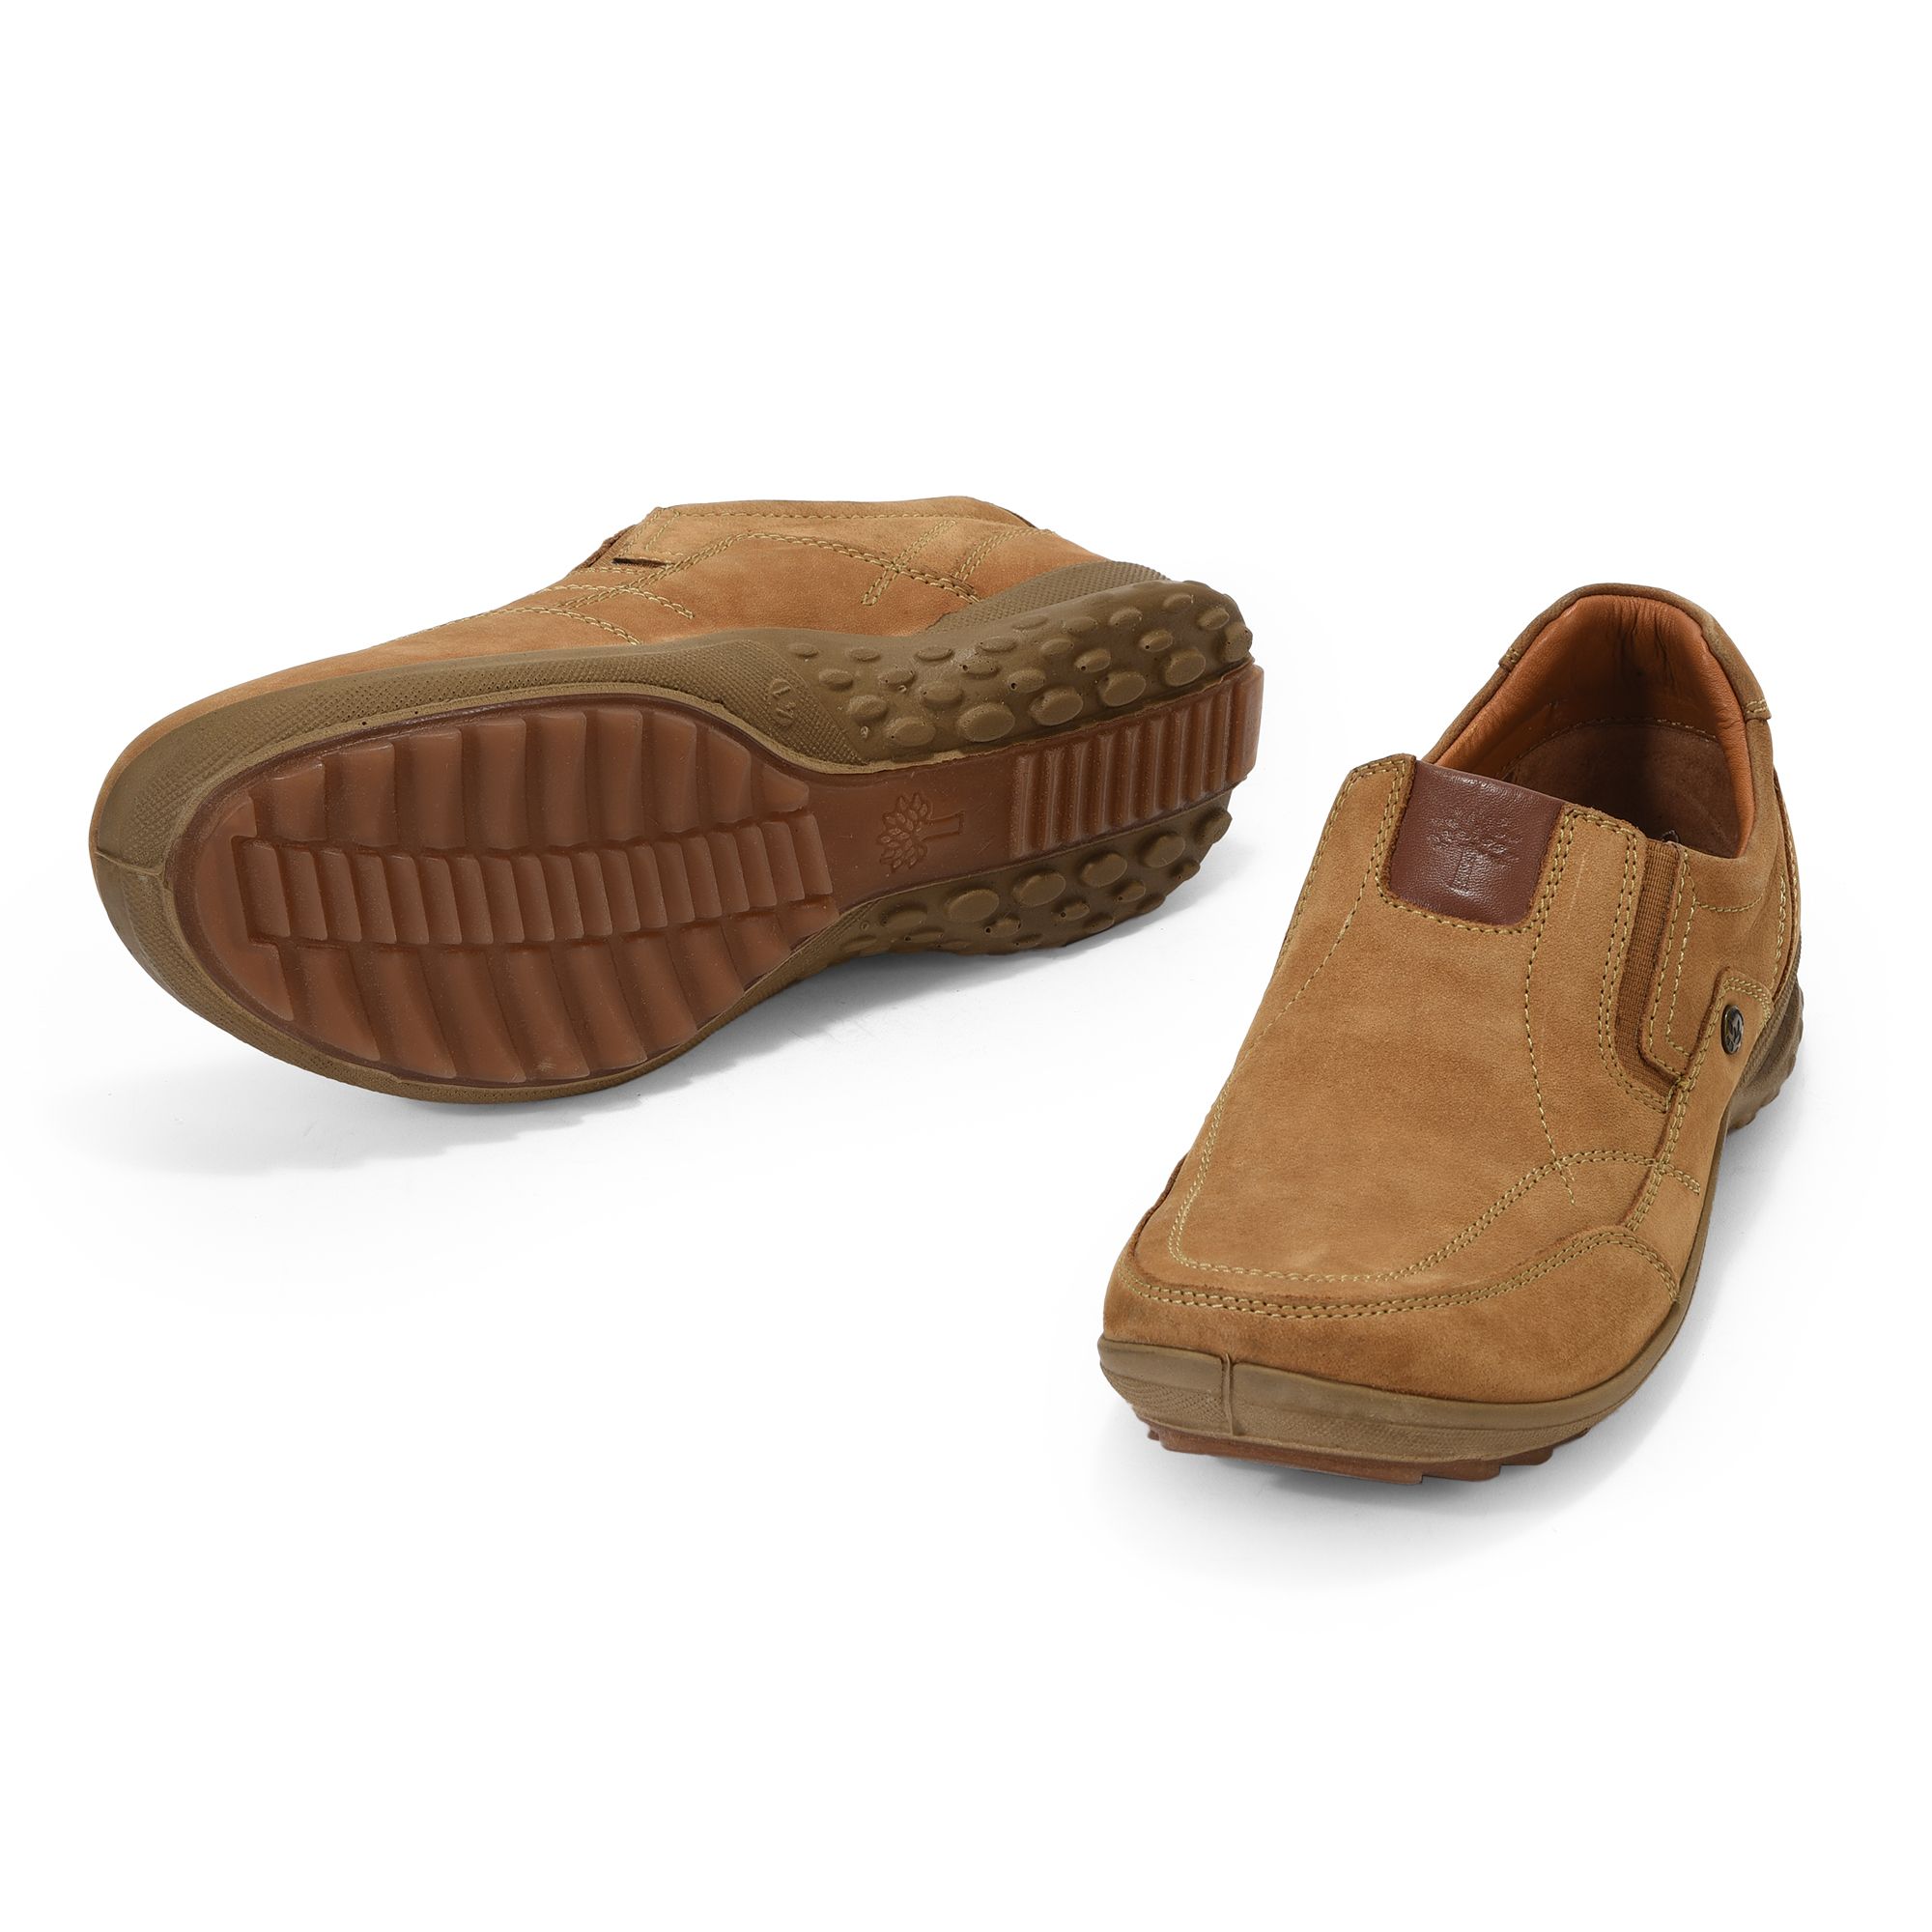 Woodland CAMEL casual slip-on shoes